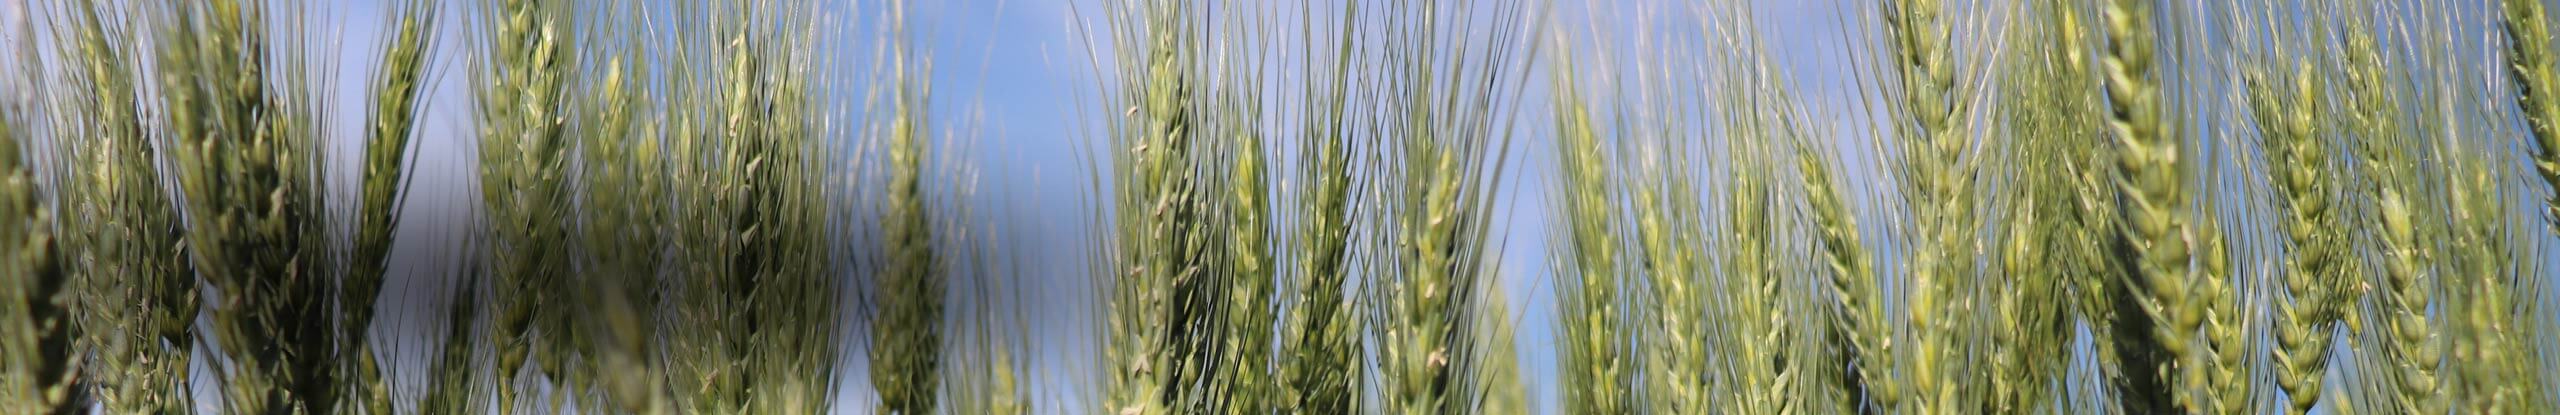 Extremes of Moisture: Enhancing excess moisture tolerance in barley through manipulation of phytoglobins